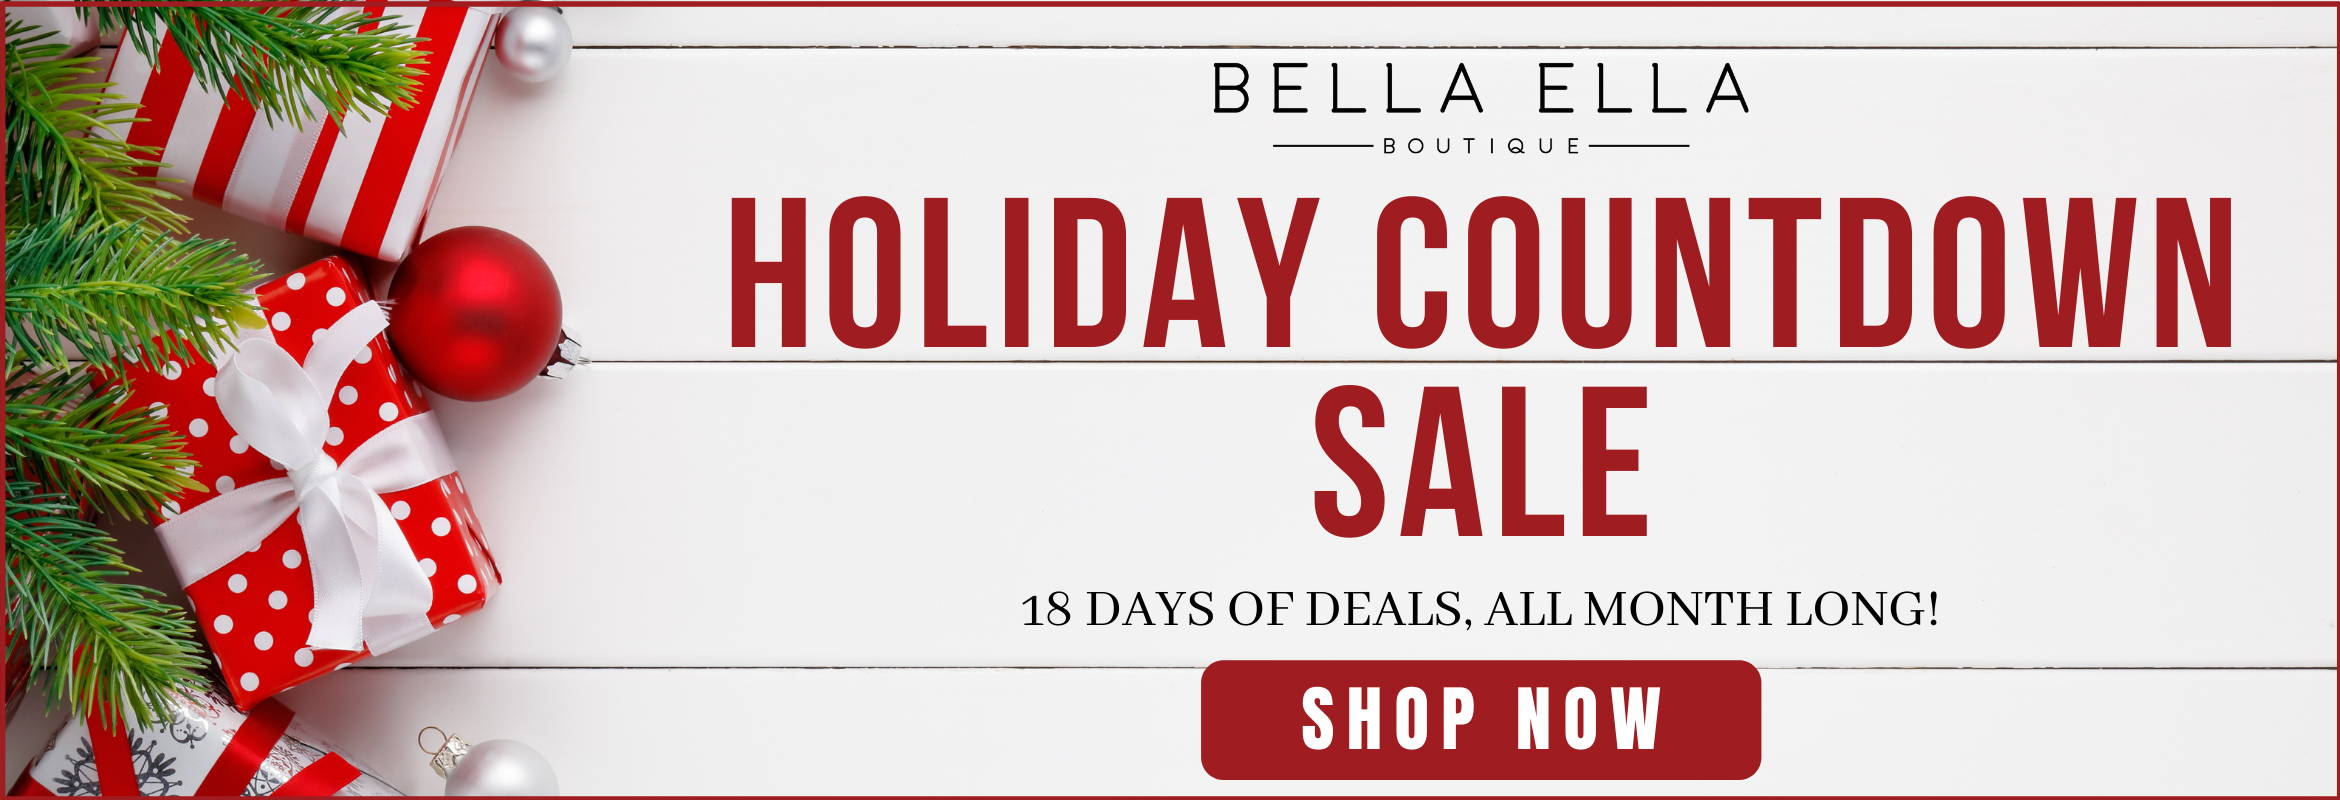 HOLIDAY COUNTDOWN SALE